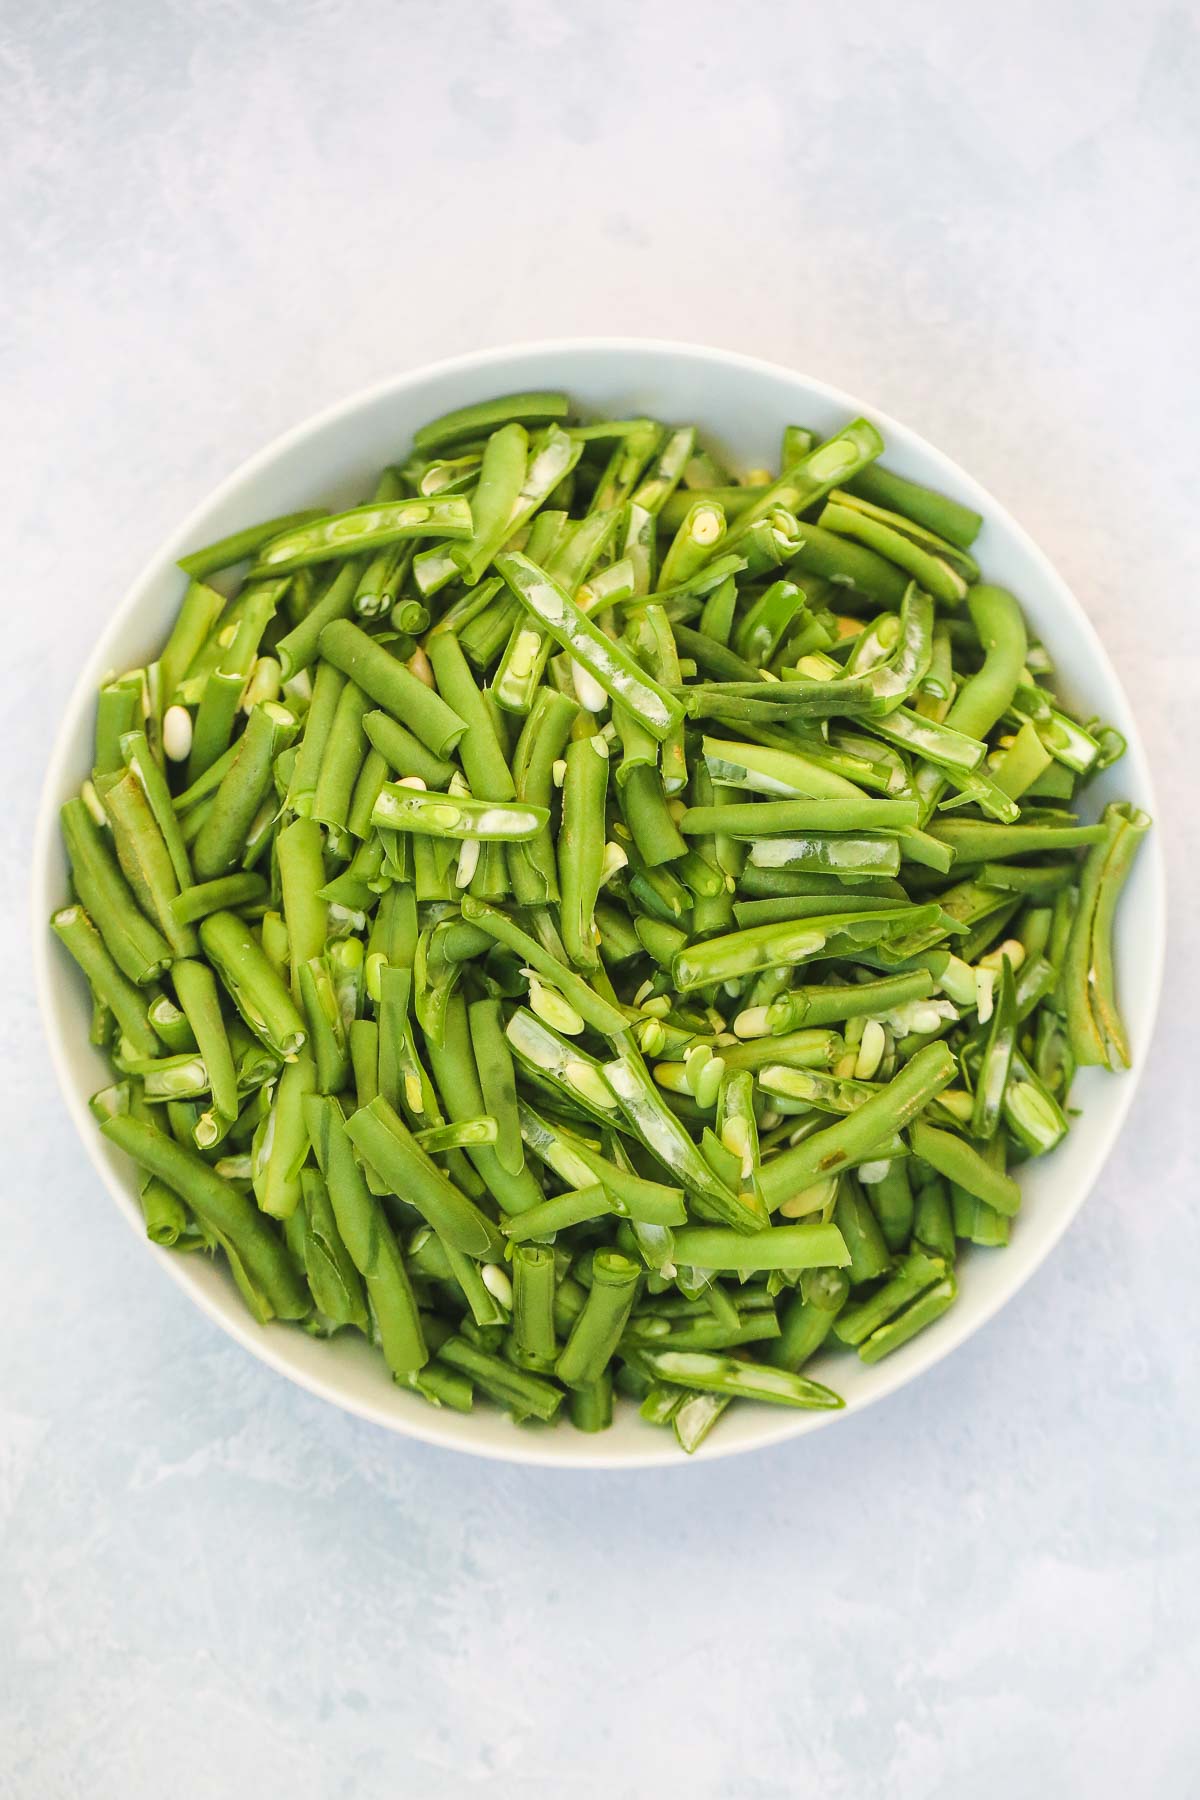 Sliced green beans in a white bowl